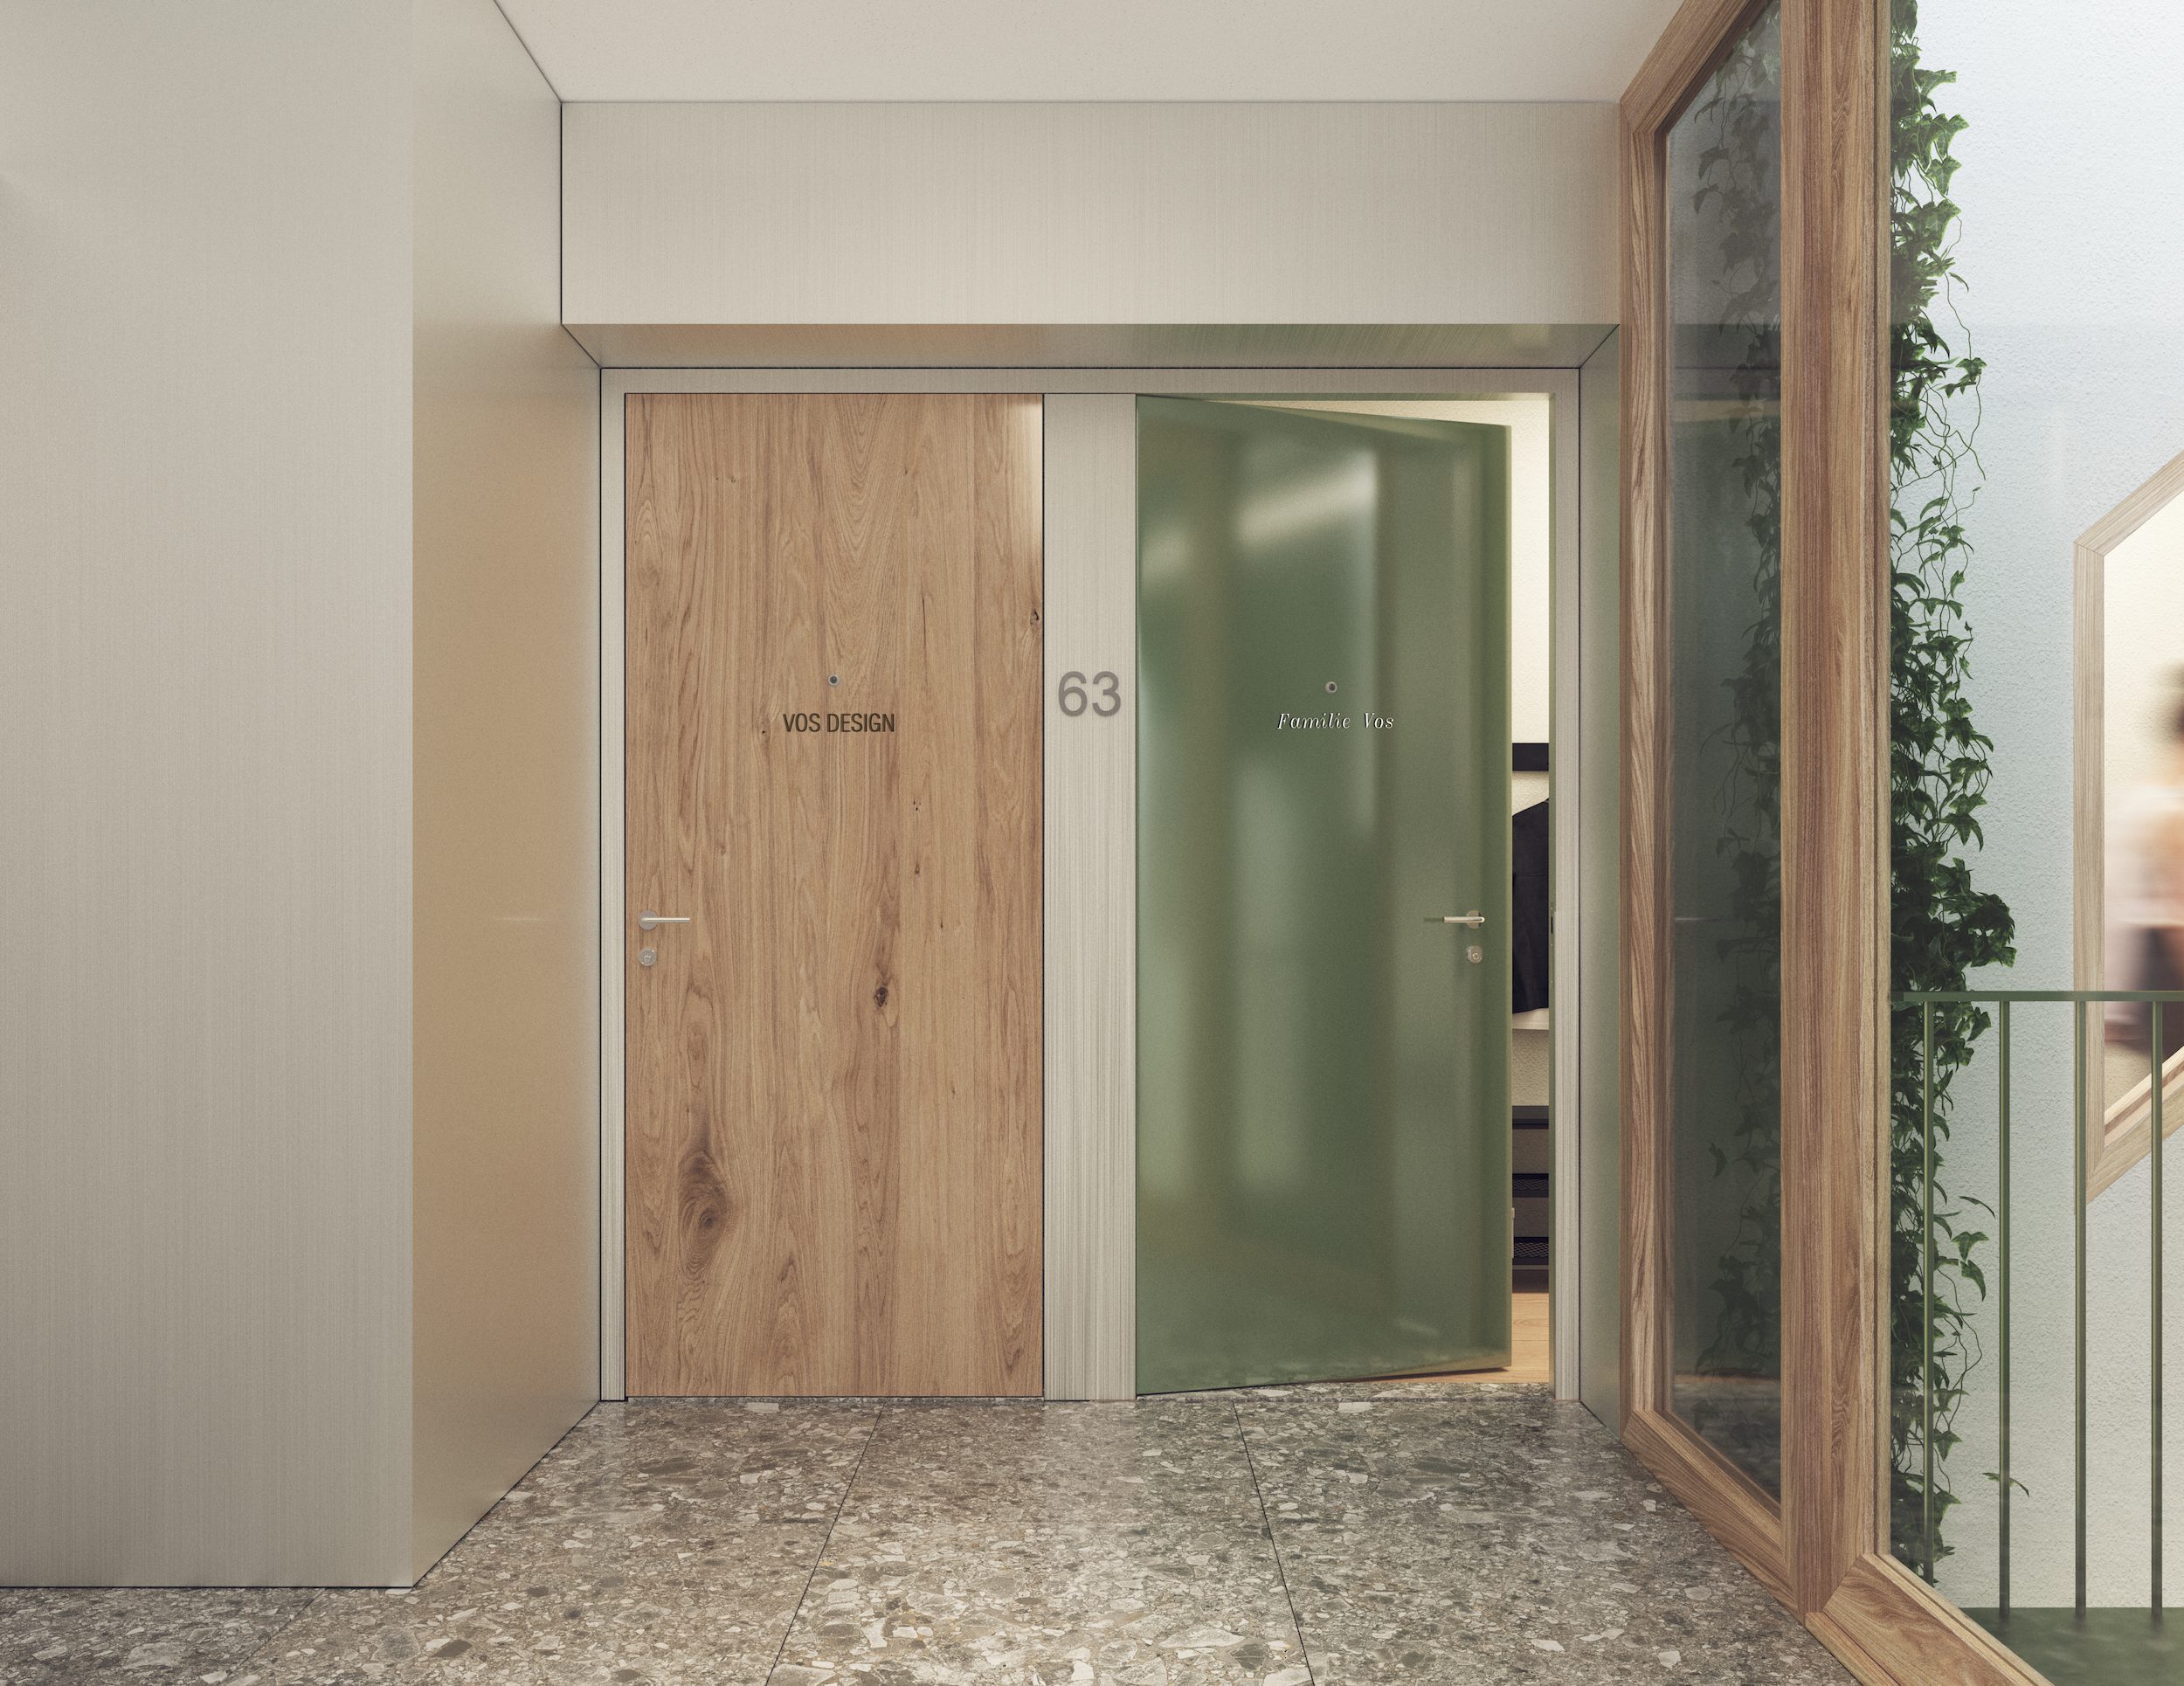 The Doors -  - a project by Space Encounters Office for Architecture